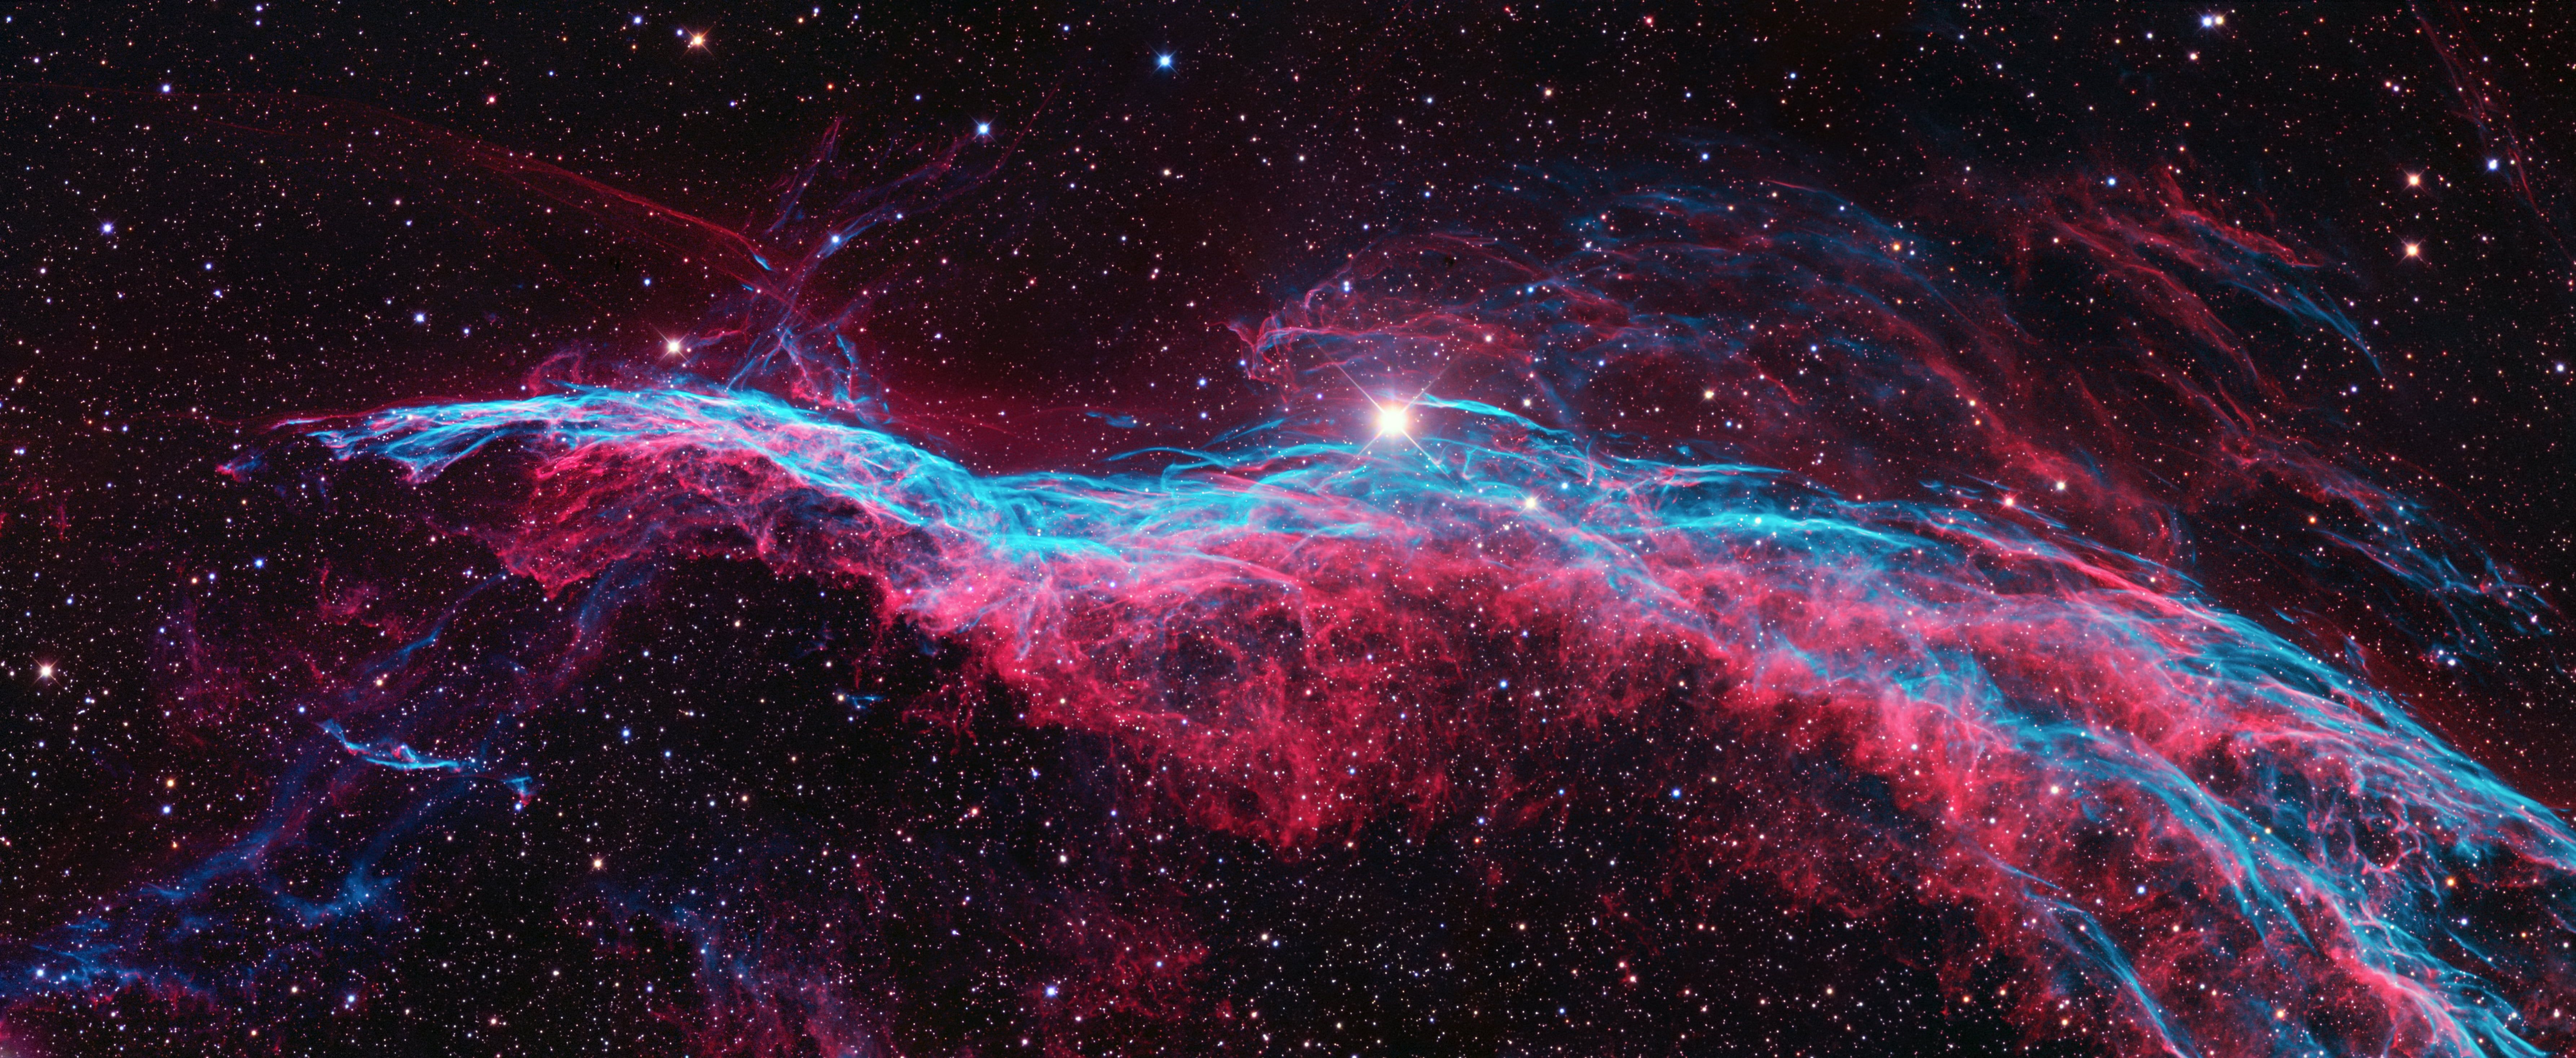 red and blue galaxy a supernova in the constellation Cygnus LBN 191 The witch's broom nebula #NGC6960 K #wallpaper #hd. Nebula, Nebula wallpaper, Constellations